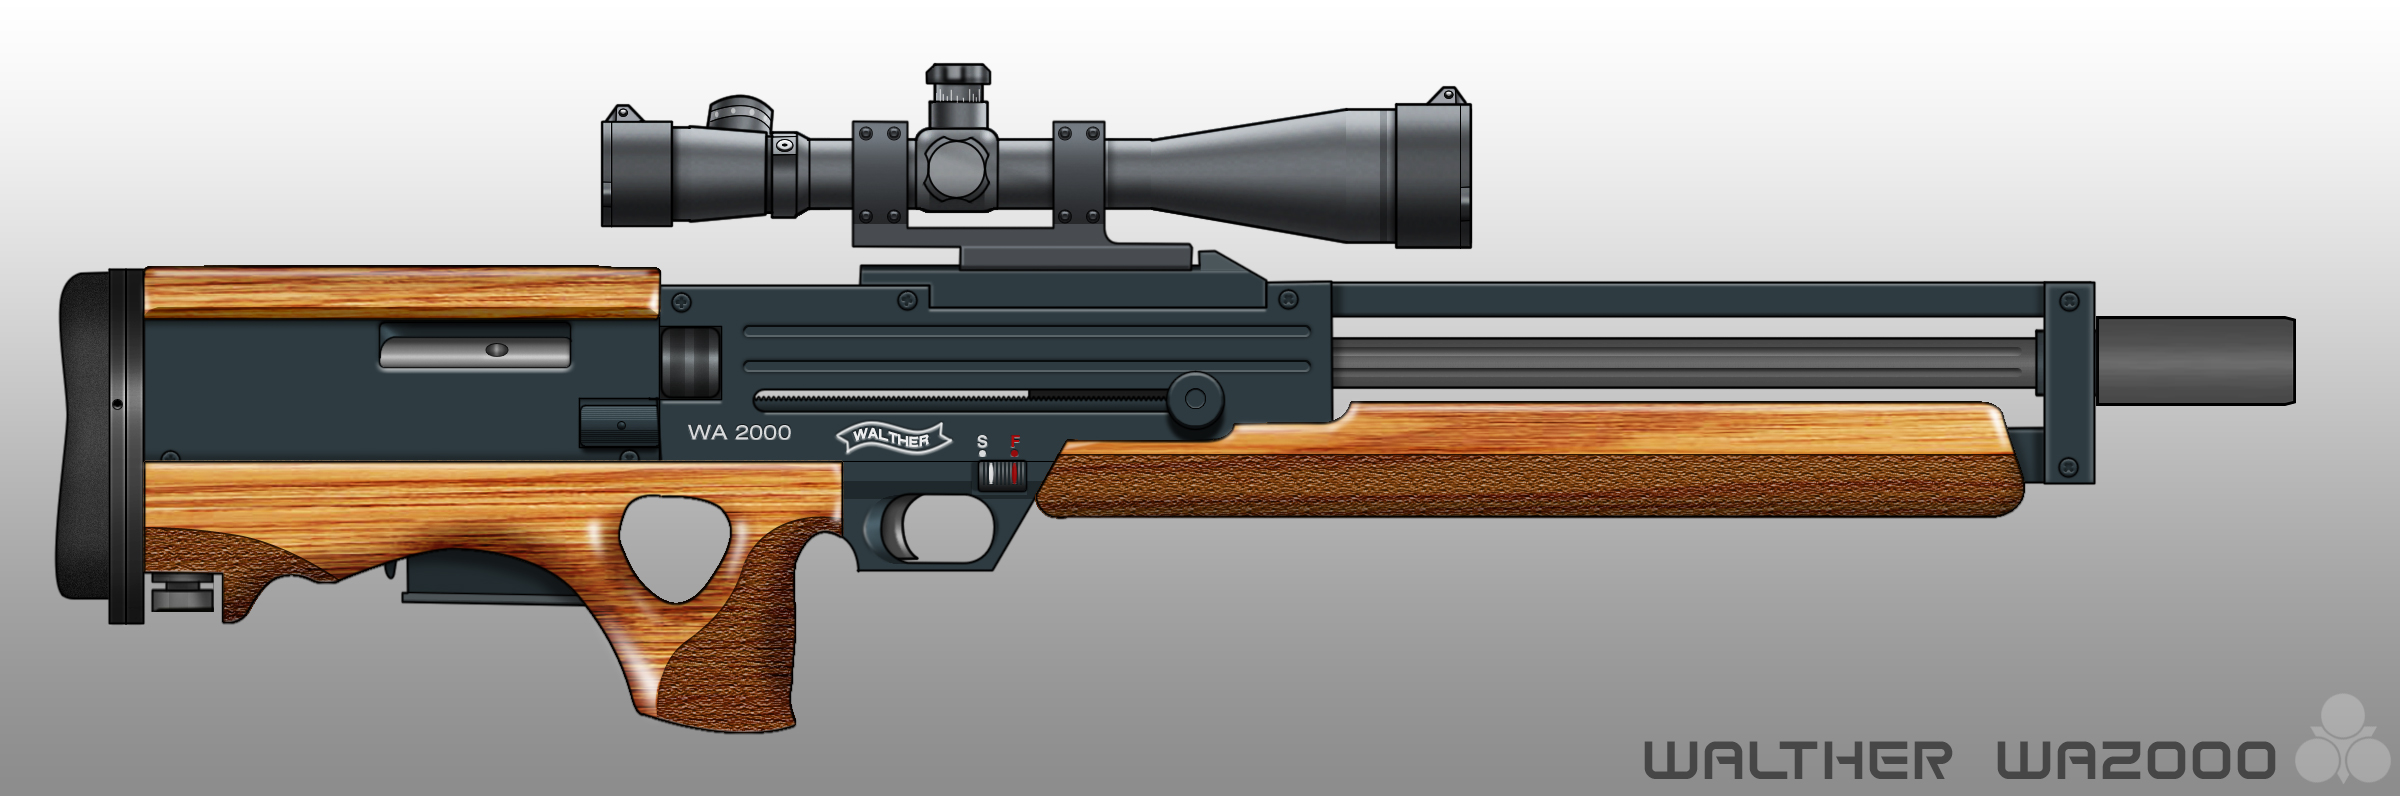 Walther Wa 2000 Rifle Backgrounds, Compatible - PC, Mobile, Gadgets| 2400x796 px